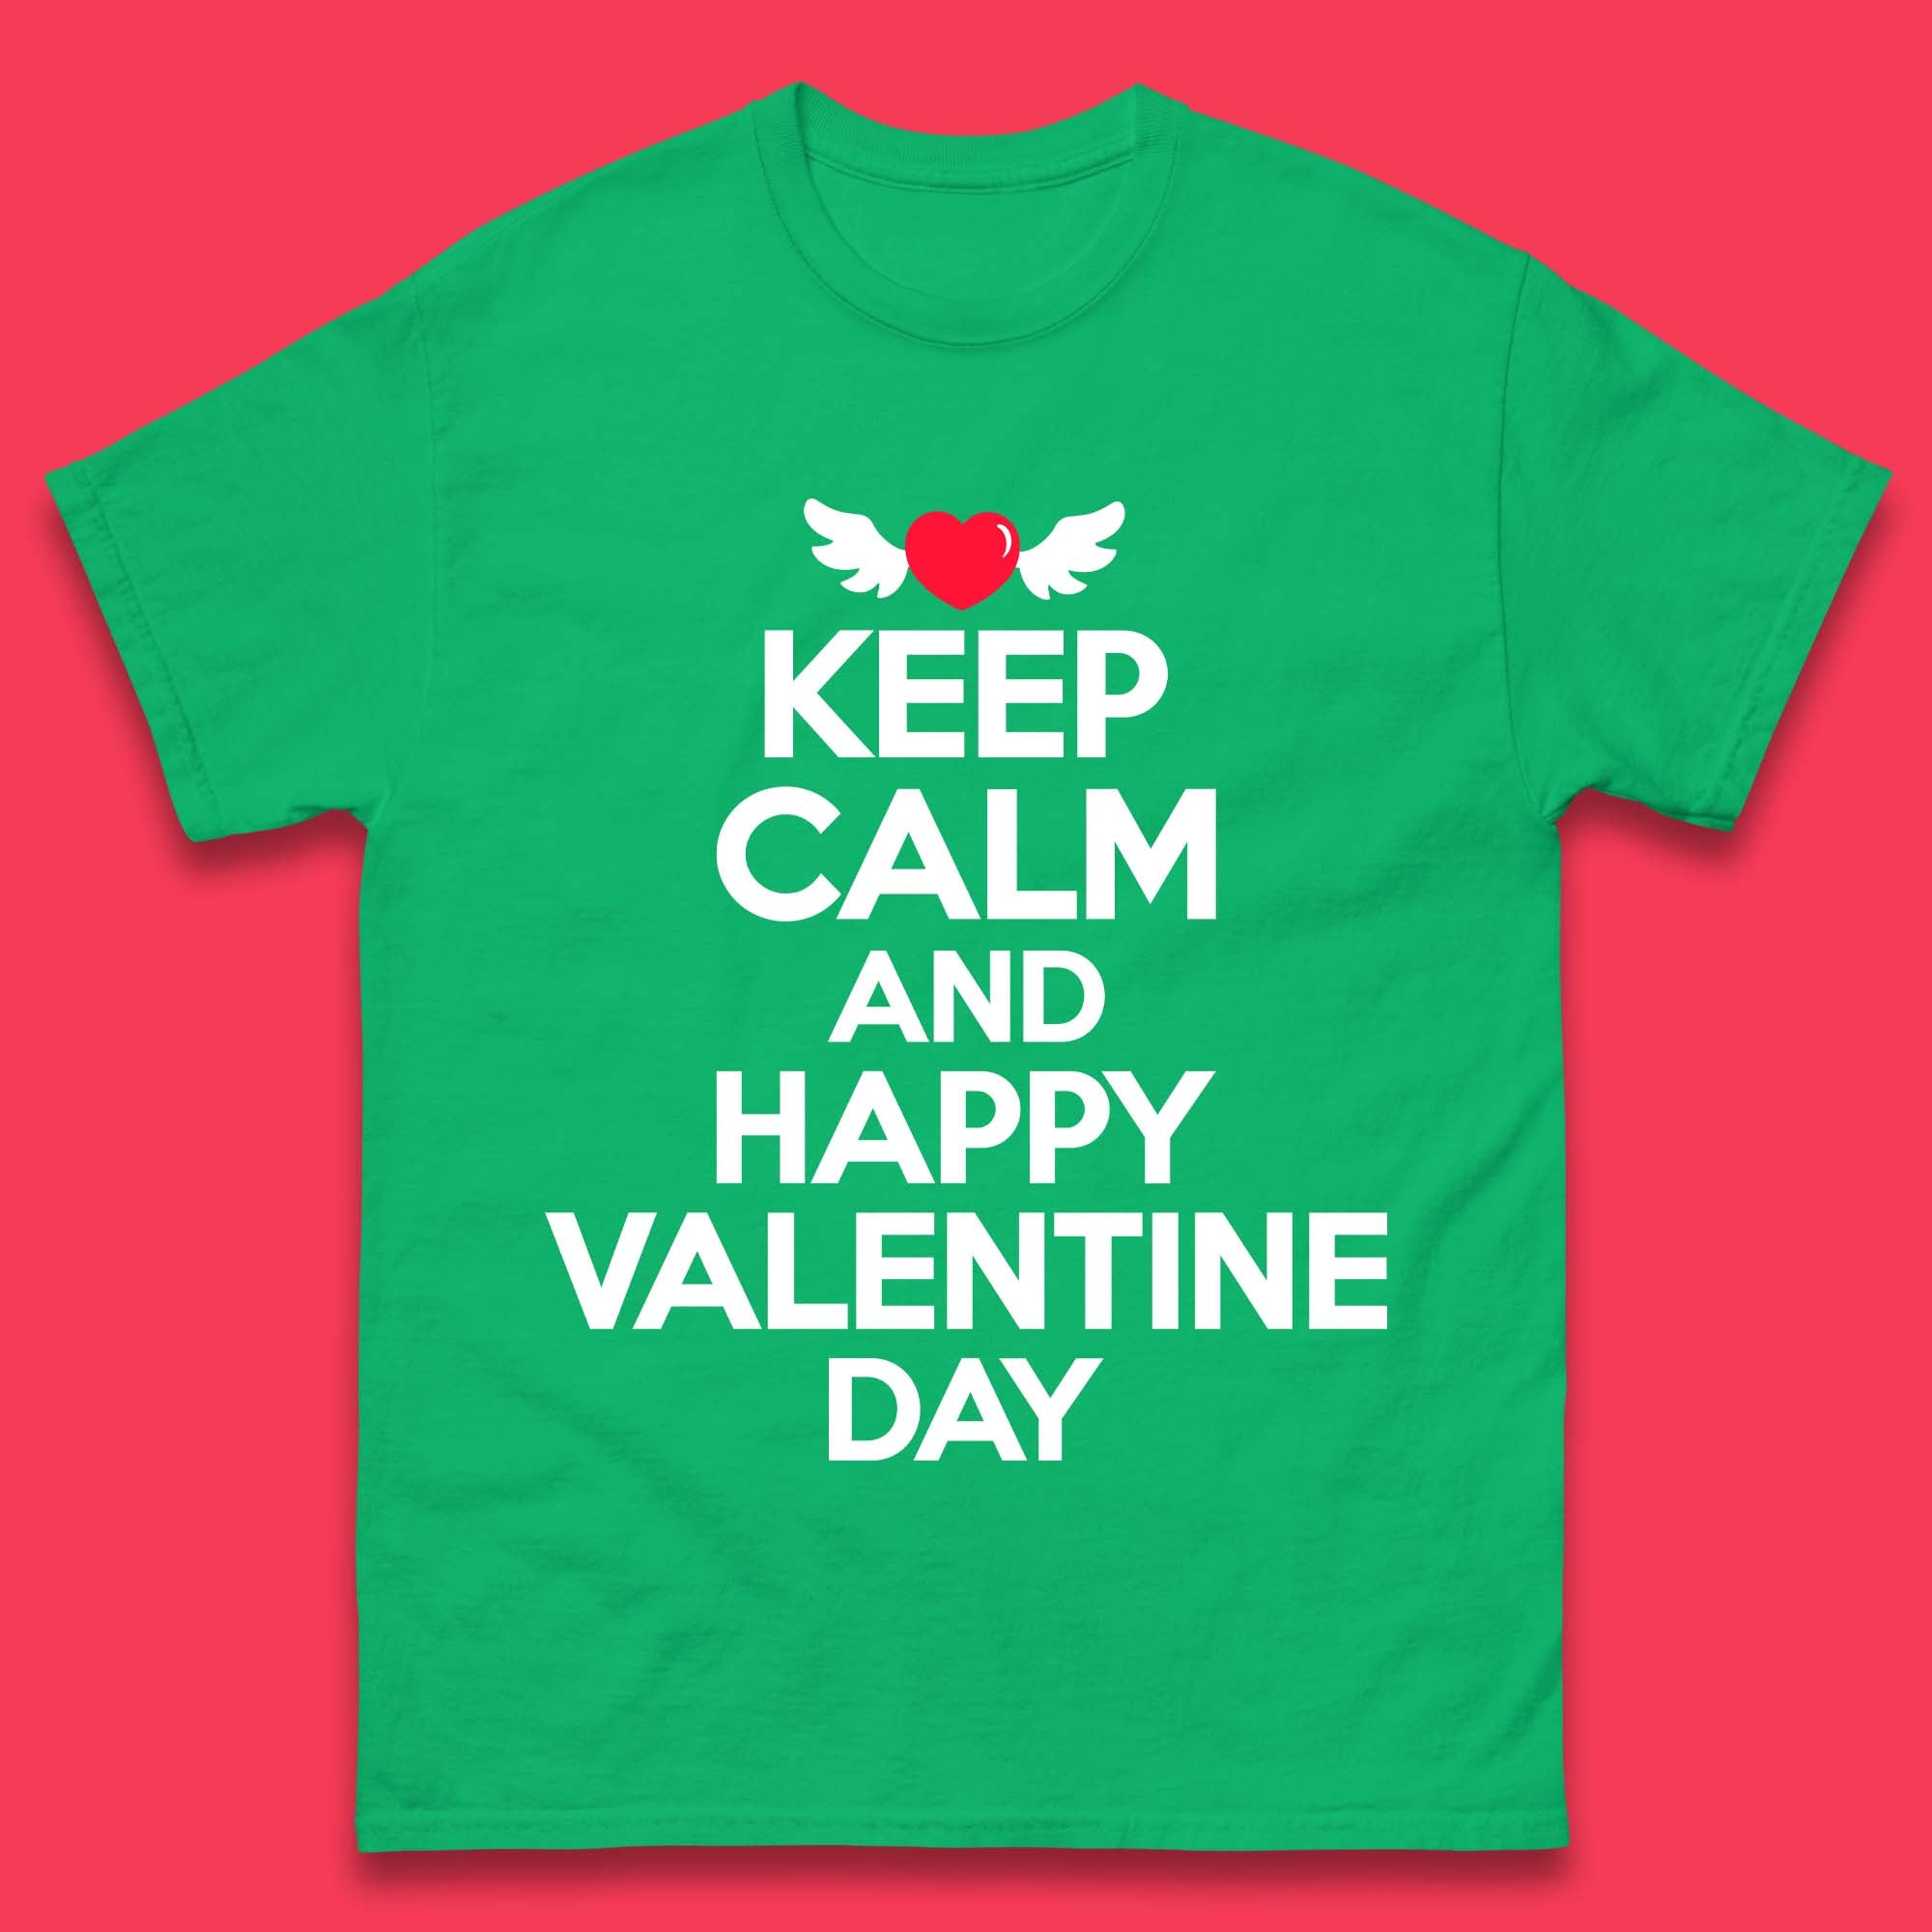 Keep Calm And Happy Valentine Day Mens T-Shirt